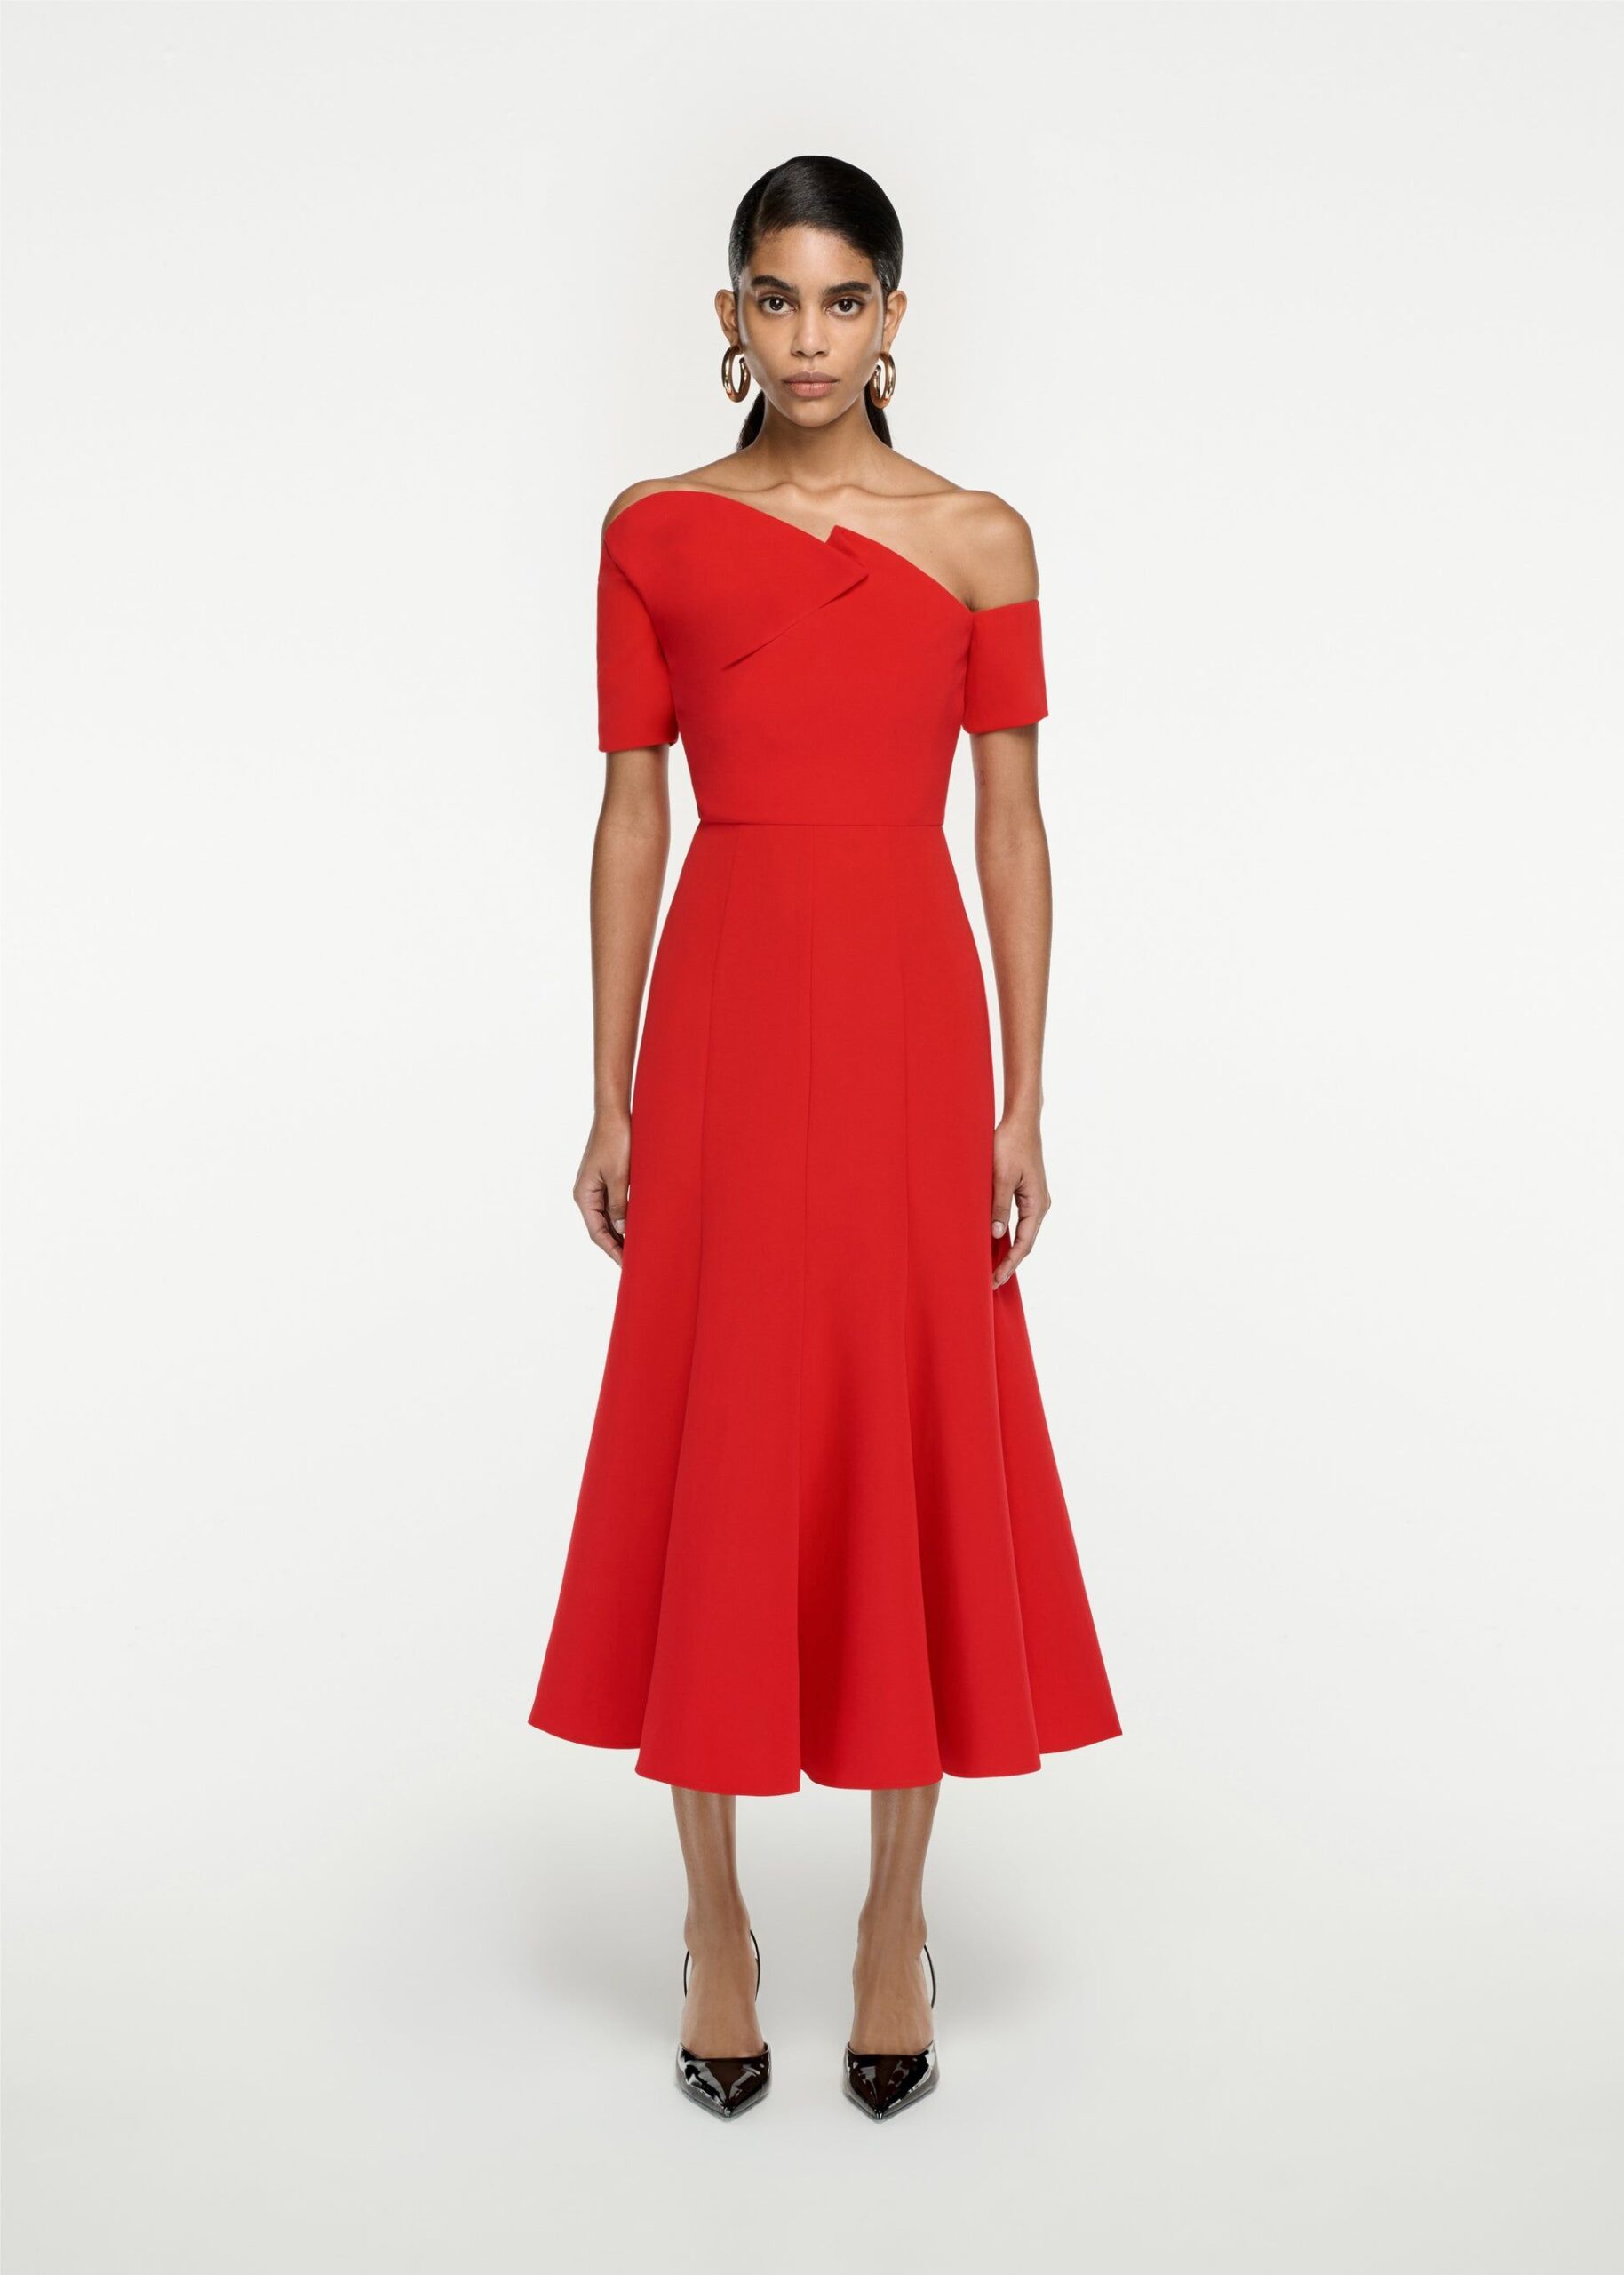 Red Midi Dress Outfit Ideas
  for Ladies